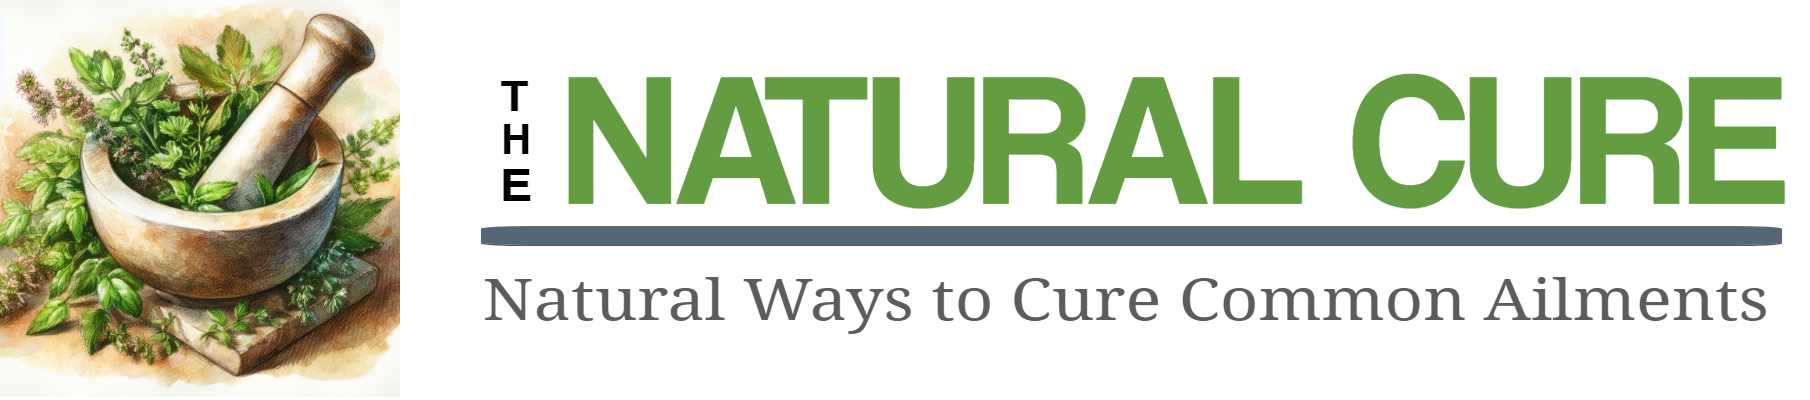 The Natural Cure For Logo https://thenaturalcurefor.com/